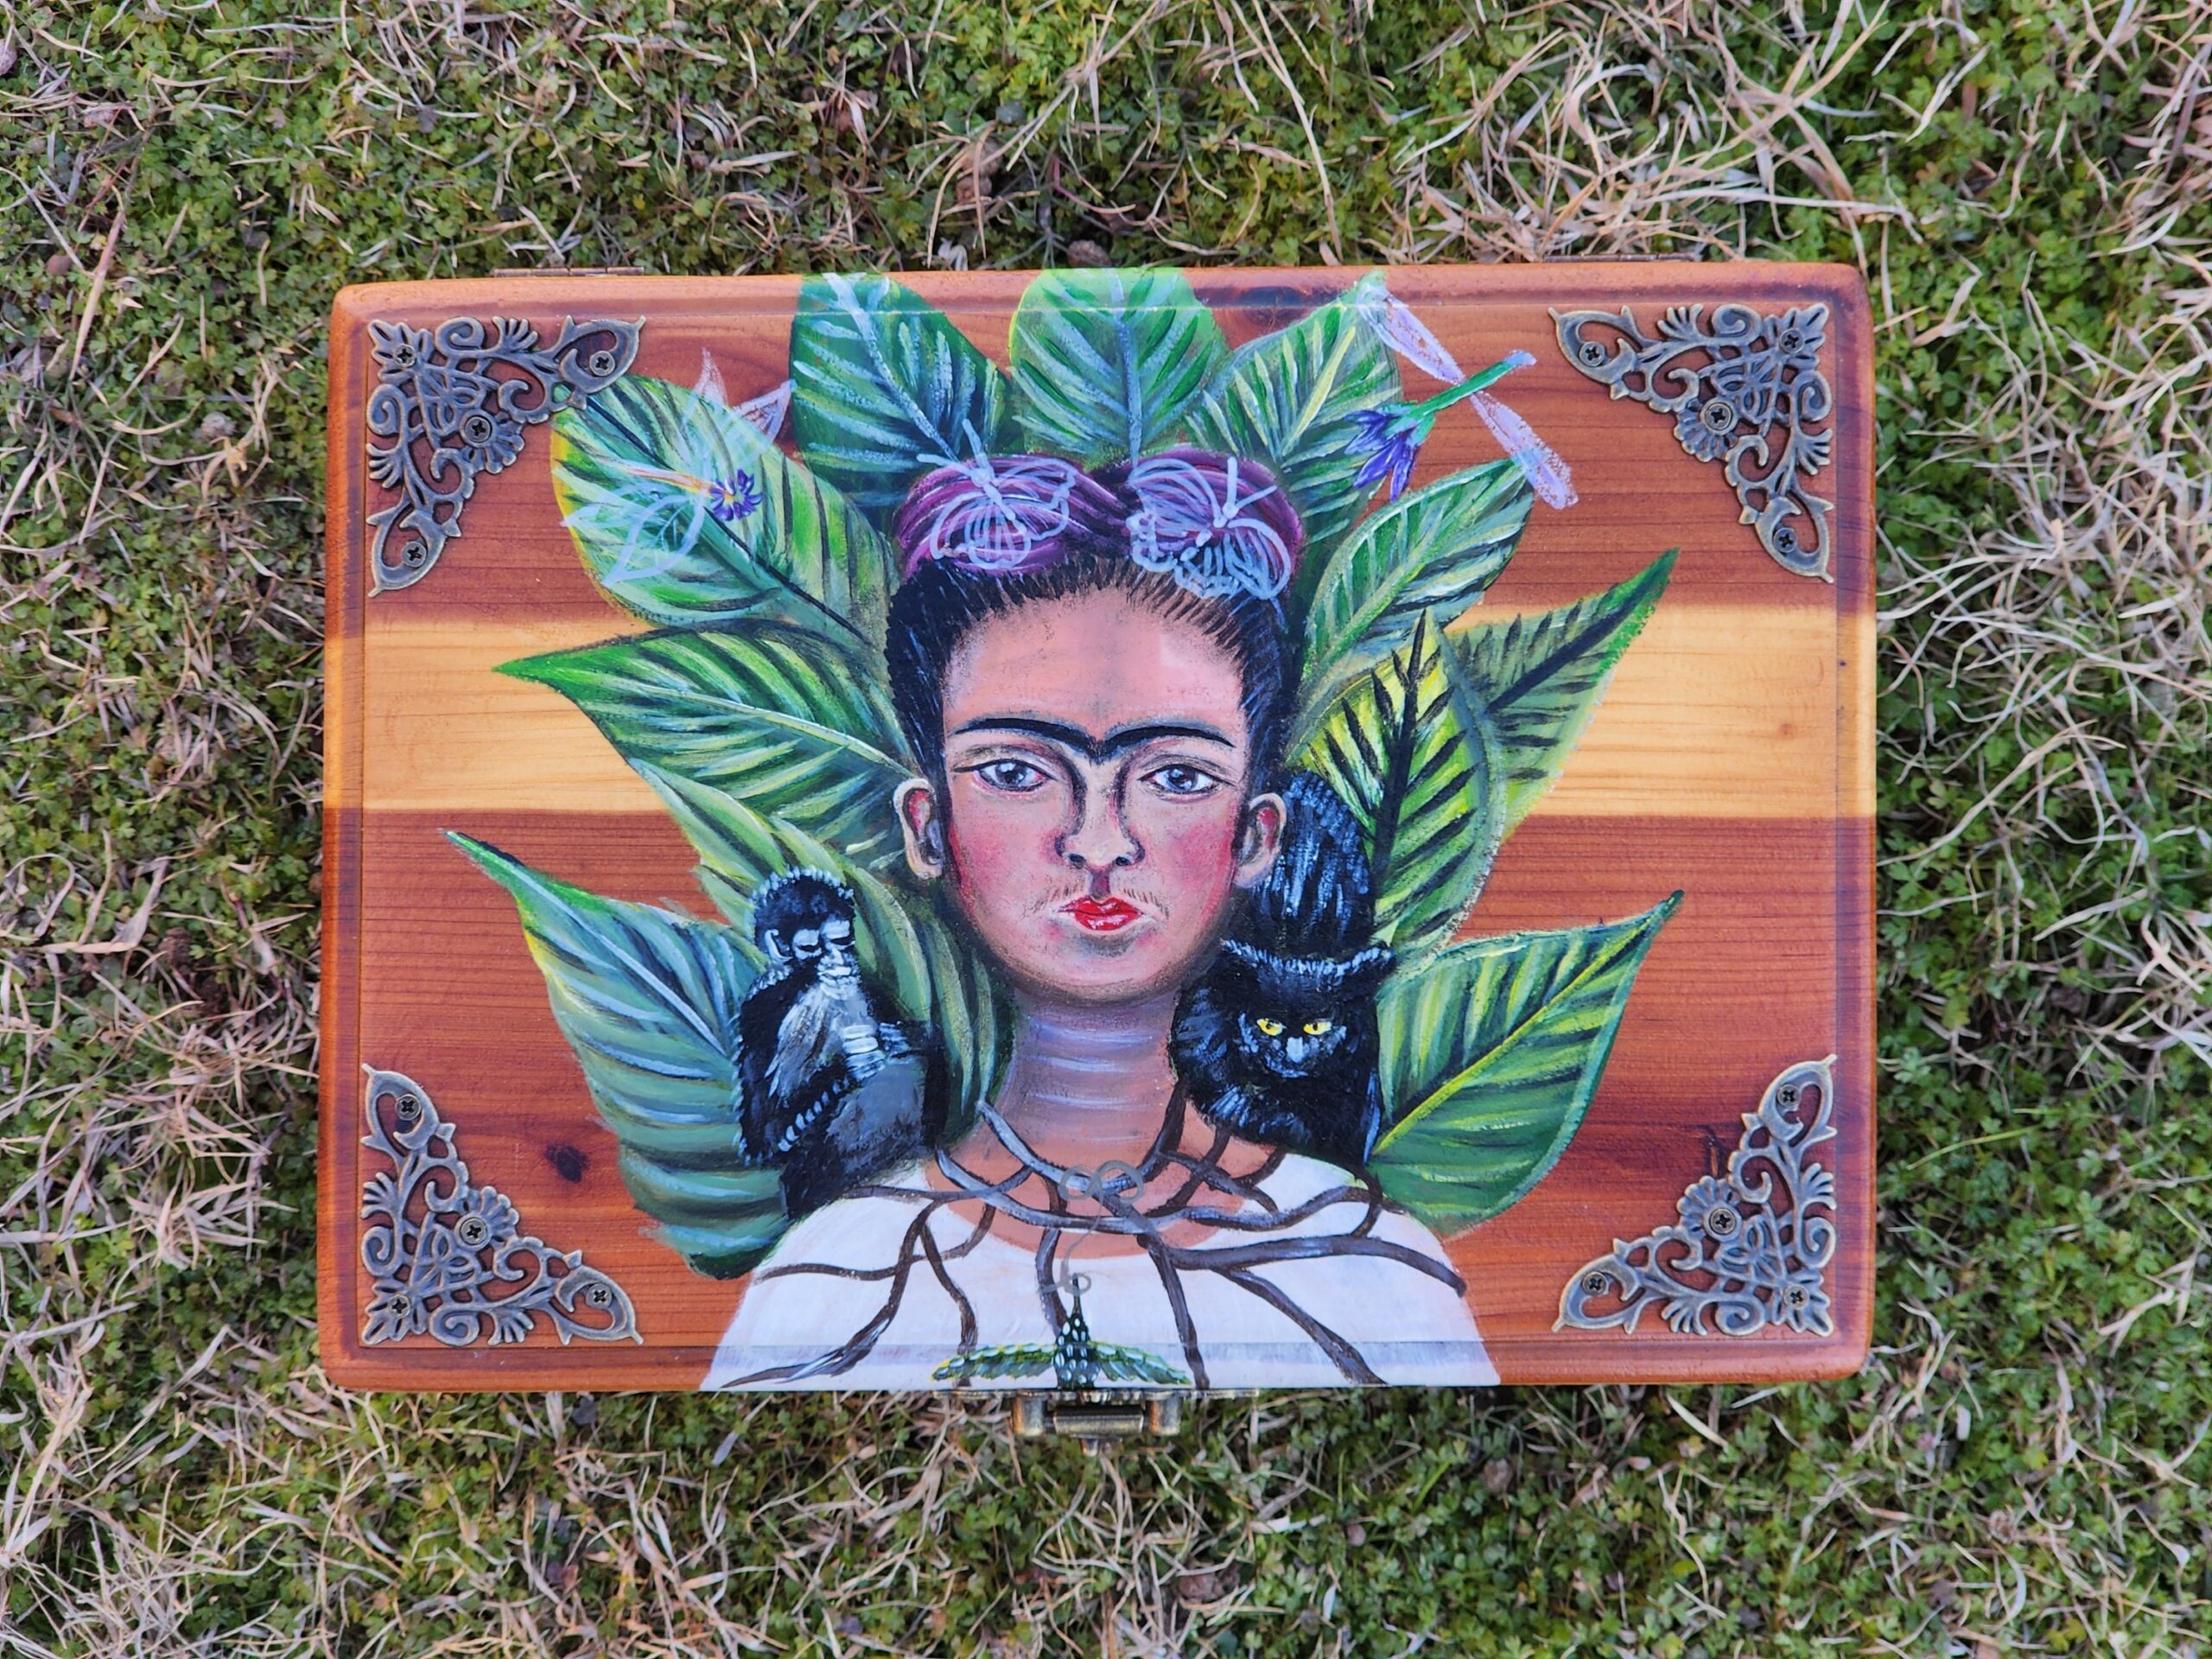 Antique wooden jewelry box with original design of Frida Kahlo. Antique bronze plated clasps and metal decorative corners.